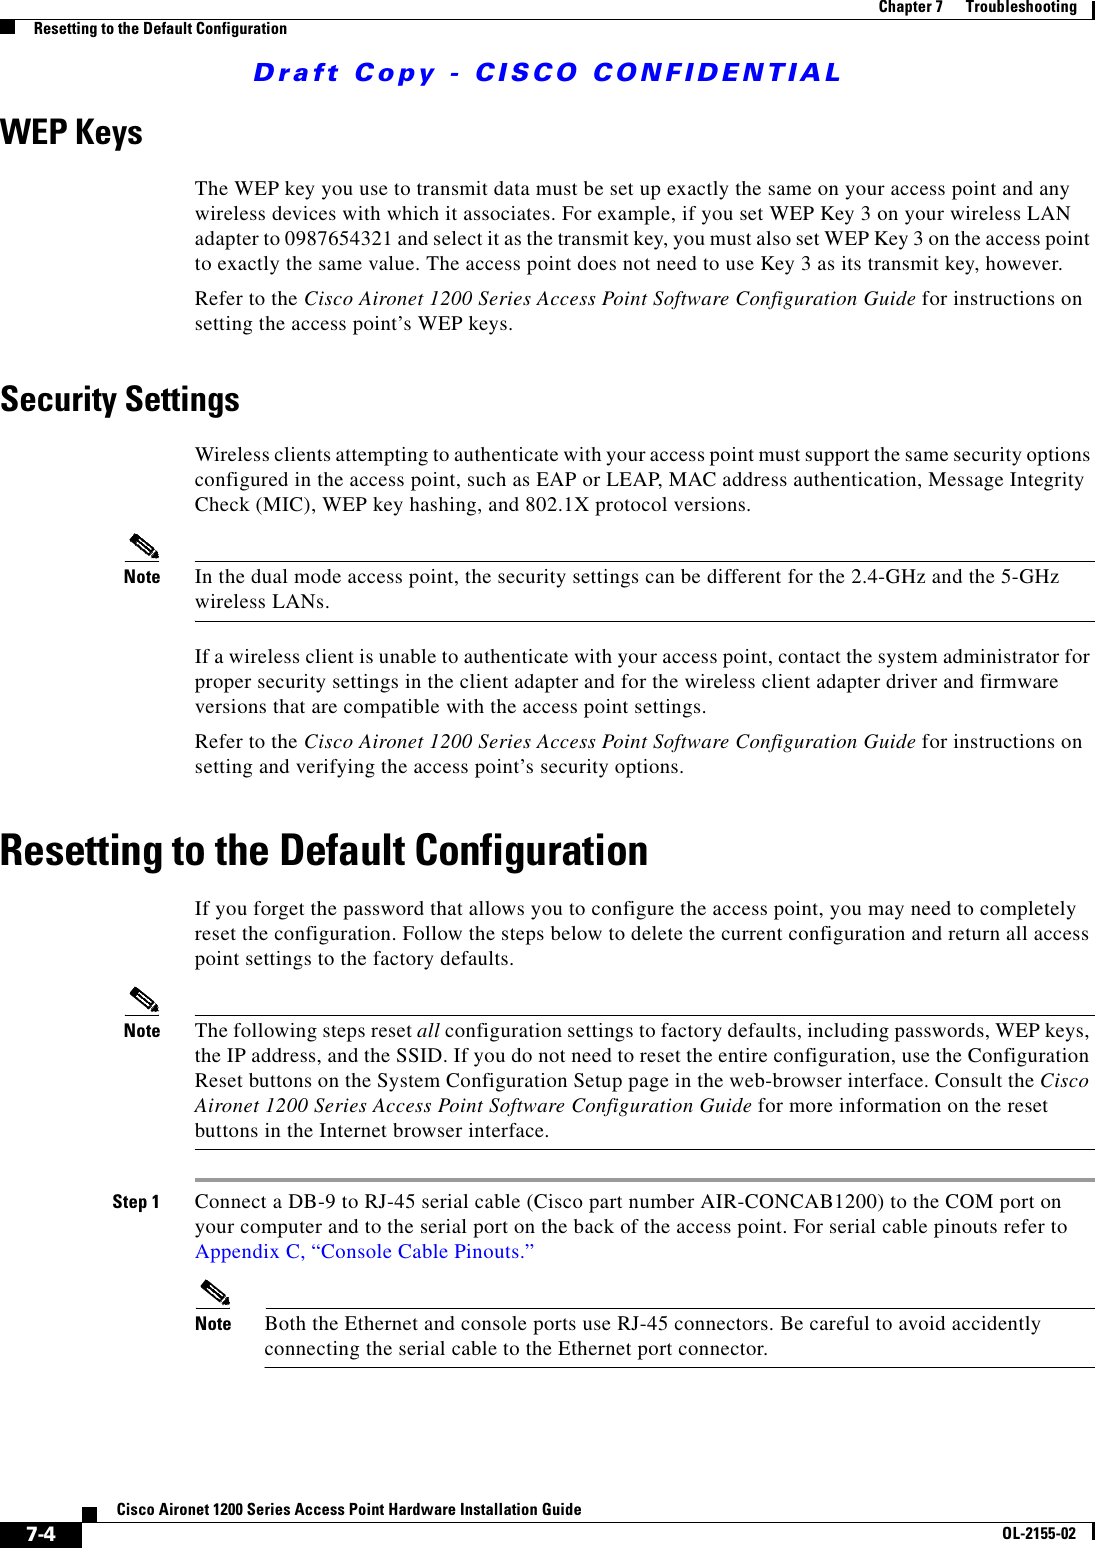 Draft Copy - CISCO CONFIDENTIAL 7-4Cisco Aironet 1200 Series Access Point Hardware Installation GuideOL-2155-02Chapter 7      TroubleshootingResetting to the Default ConfigurationWEP KeysThe WEP key you use to transmit data must be set up exactly the same on your access point and any wireless devices with which it associates. For example, if you set WEP Key 3 on your wireless LAN adapter to 0987654321 and select it as the transmit key, you must also set WEP Key 3 on the access point to exactly the same value. The access point does not need to use Key 3 as its transmit key, however.Refer to the Cisco Aironet 1200 Series Access Point Software Configuration Guide for instructions on setting the access point’s WEP keys.Security SettingsWireless clients attempting to authenticate with your access point must support the same security options configured in the access point, such as EAP or LEAP, MAC address authentication, Message Integrity Check (MIC), WEP key hashing, and 802.1X protocol versions.Note In the dual mode access point, the security settings can be different for the 2.4-GHz and the 5-GHz wireless LANs. If a wireless client is unable to authenticate with your access point, contact the system administrator for proper security settings in the client adapter and for the wireless client adapter driver and firmware versions that are compatible with the access point settings.Refer to the Cisco Aironet 1200 Series Access Point Software Configuration Guide for instructions on setting and verifying the access point’s security options.Resetting to the Default ConfigurationIf you forget the password that allows you to configure the access point, you may need to completely reset the configuration. Follow the steps below to delete the current configuration and return all access point settings to the factory defaults.Note The following steps reset all configuration settings to factory defaults, including passwords, WEP keys, the IP address, and the SSID. If you do not need to reset the entire configuration, use the Configuration Reset buttons on the System Configuration Setup page in the web-browser interface. Consult the Cisco Aironet 1200 Series Access Point Software Configuration Guide for more information on the reset buttons in the Internet browser interface.Step 1 Connect a DB-9 to RJ-45 serial cable (Cisco part number AIR-CONCAB1200) to the COM port on your computer and to the serial port on the back of the access point. For serial cable pinouts refer to Appendix C, “Console Cable Pinouts.”Note Both the Ethernet and console ports use RJ-45 connectors. Be careful to avoid accidently connecting the serial cable to the Ethernet port connector. 